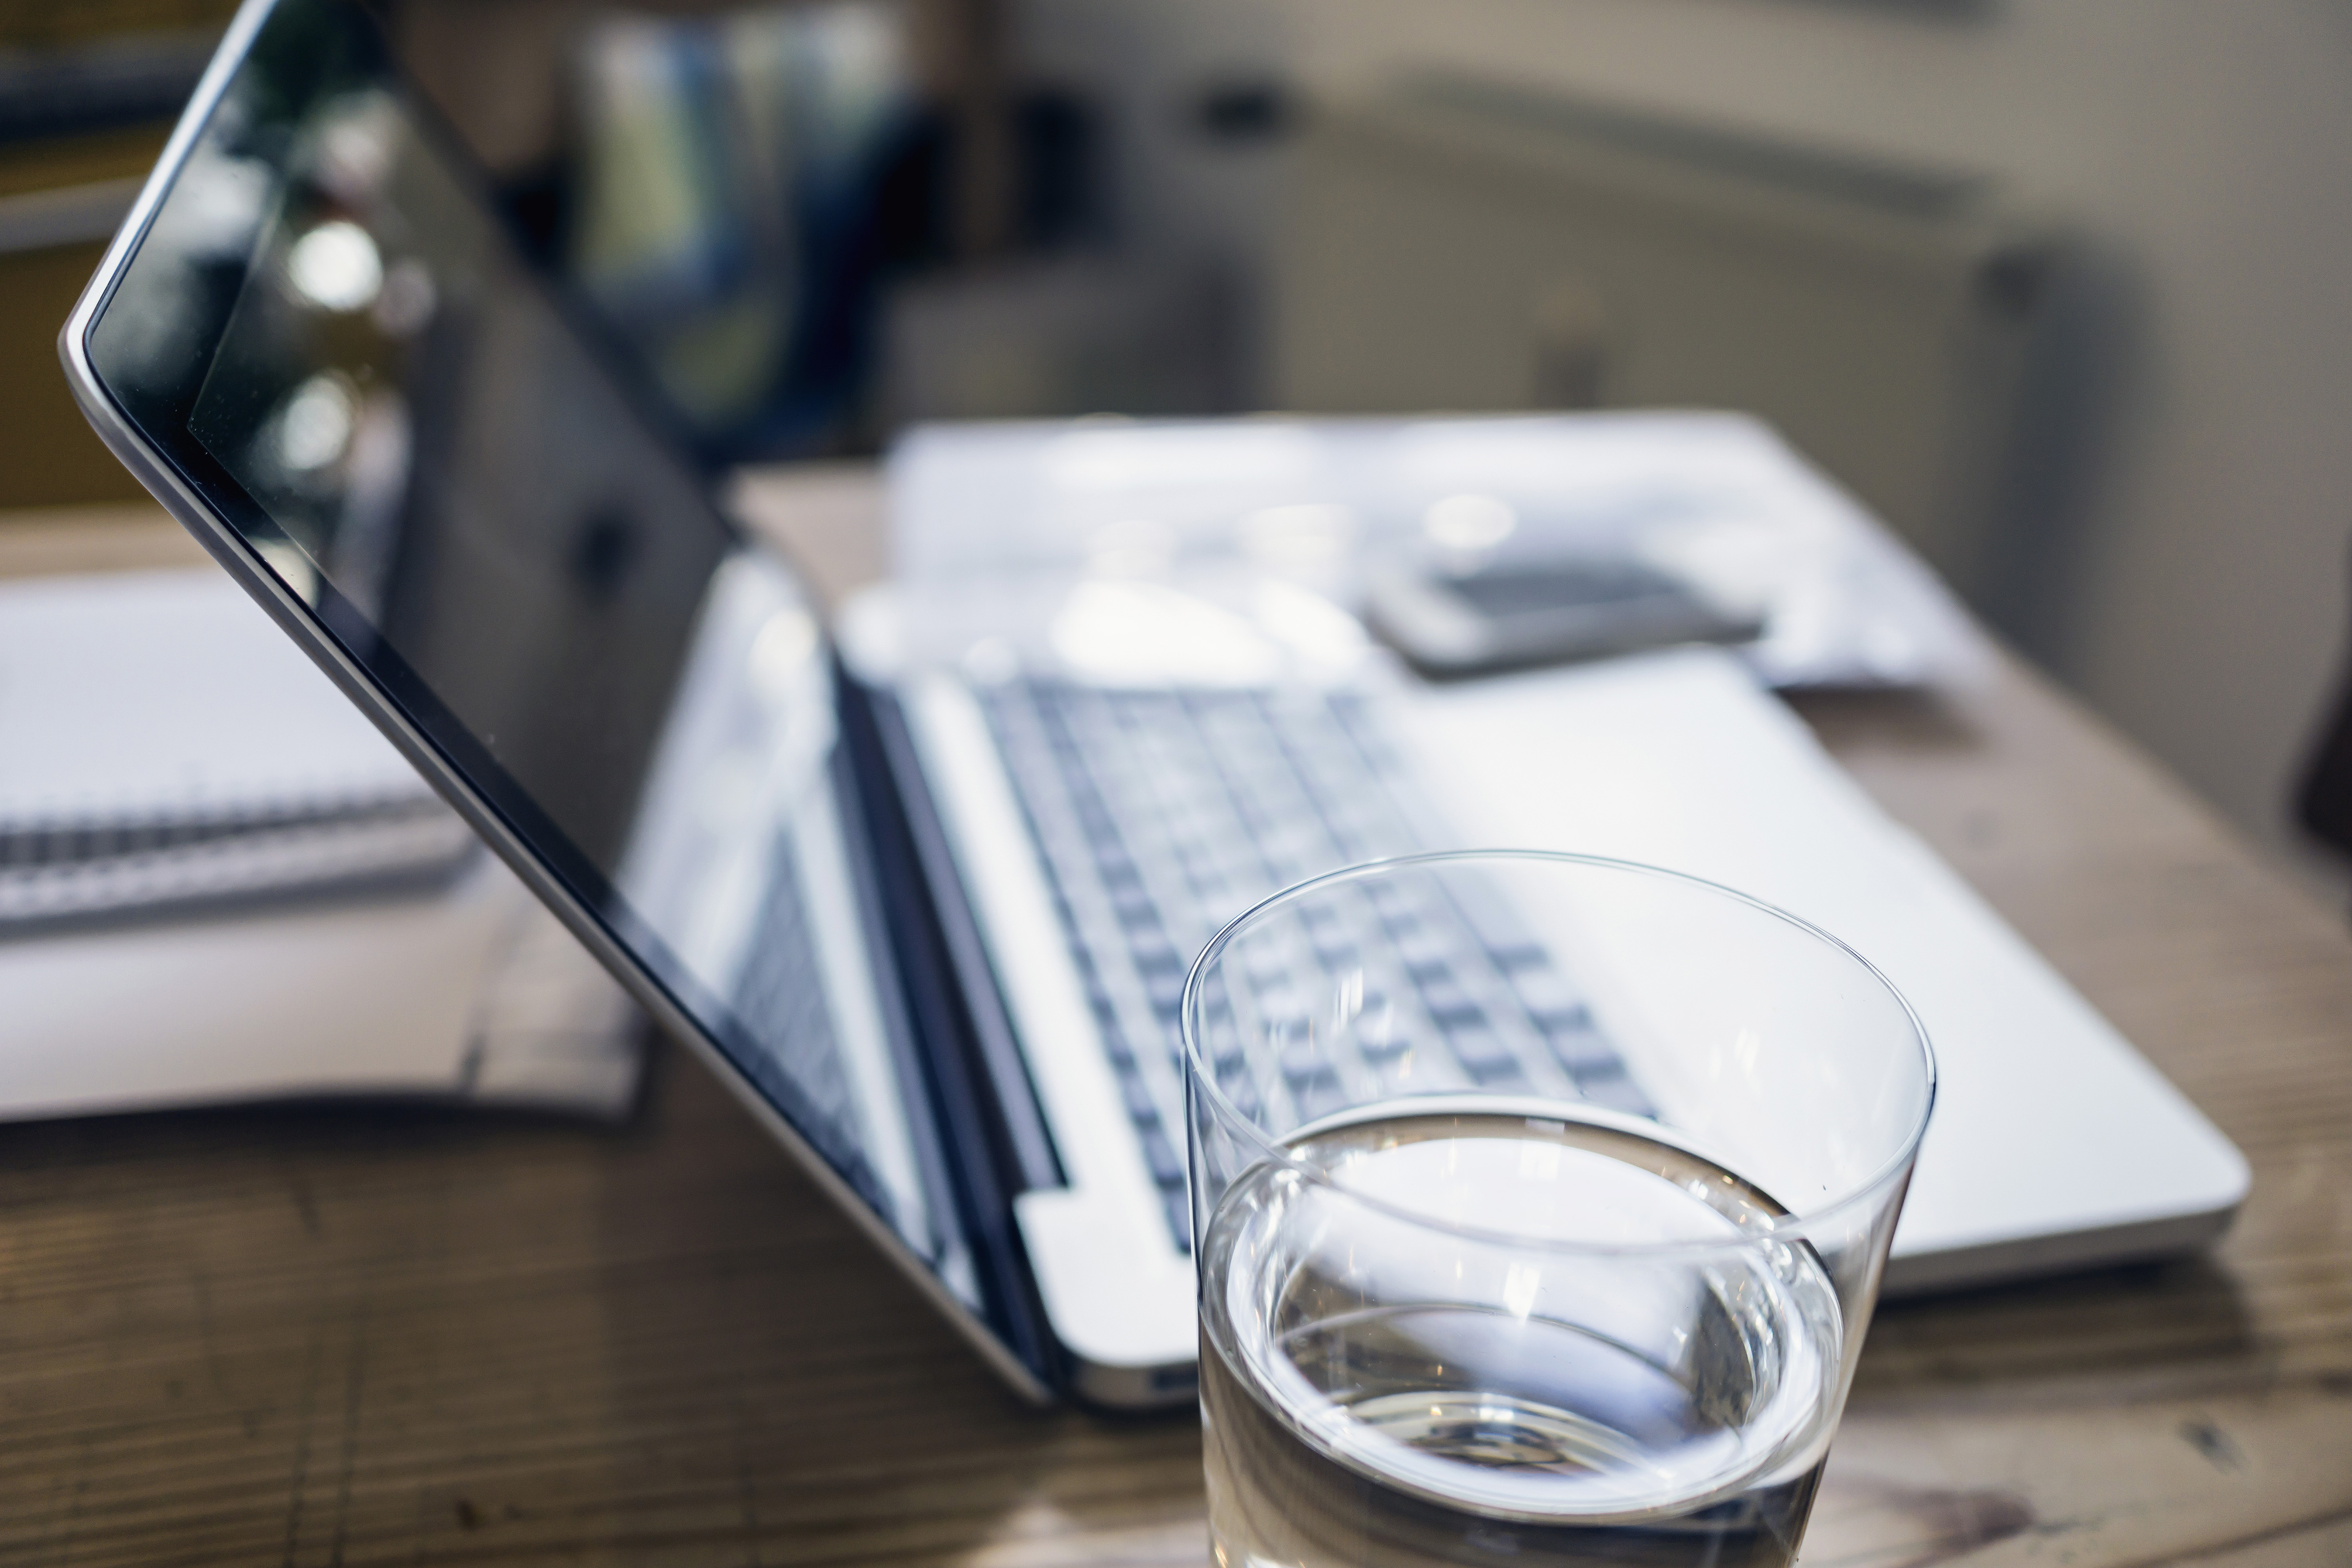 Glass of water, documents and laptop on a wooden table